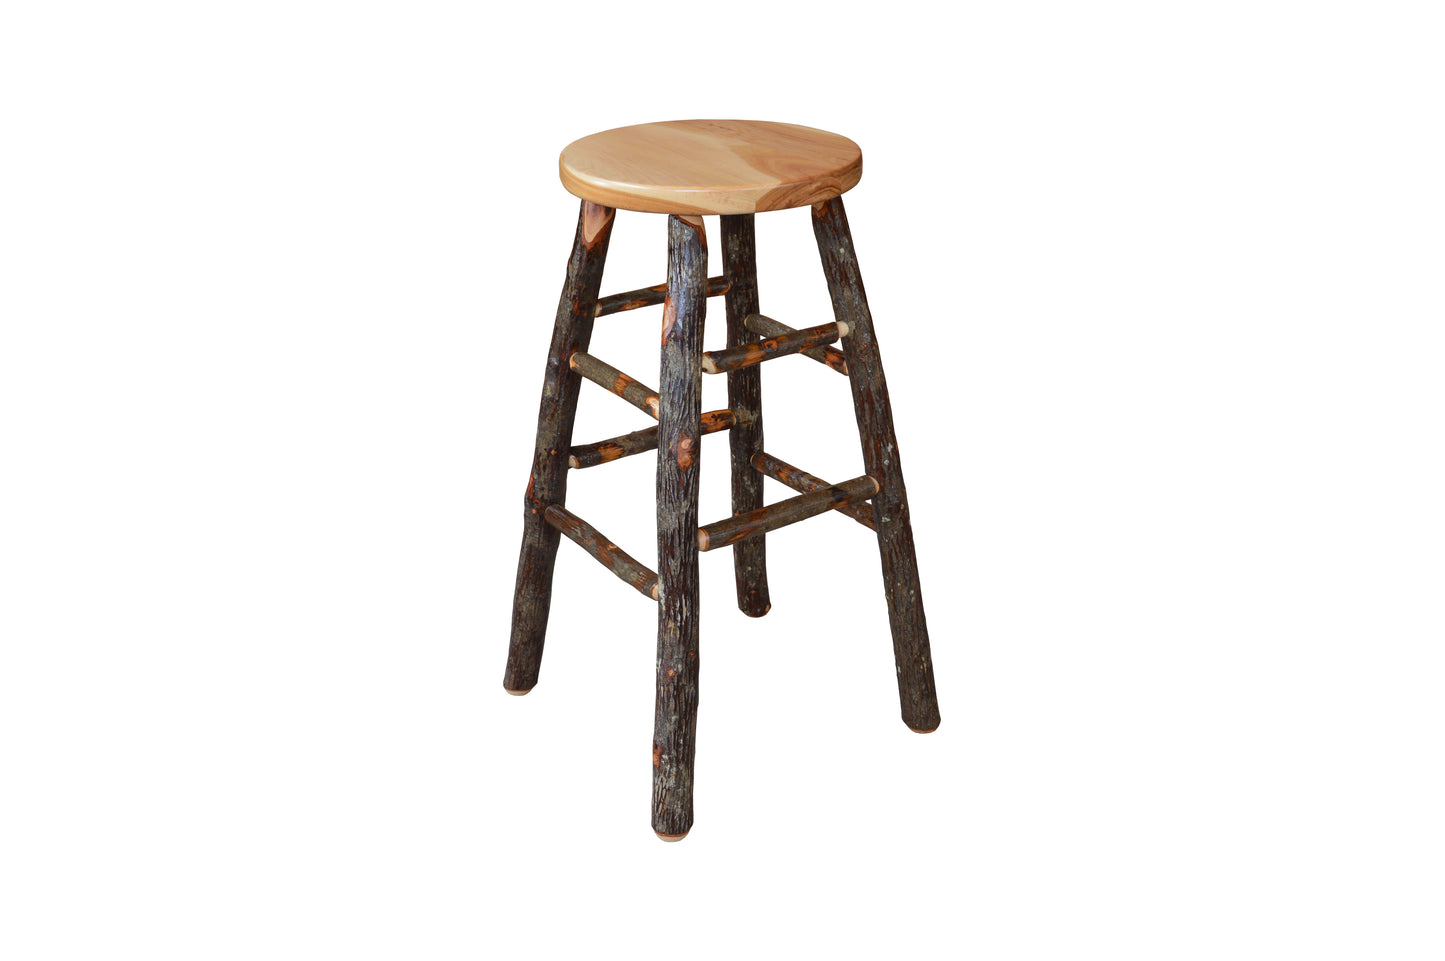 A&L Furniture Co. Hickory Bar Stool - LEAD TIME TO SHIP 4 WEEKS OR LESS